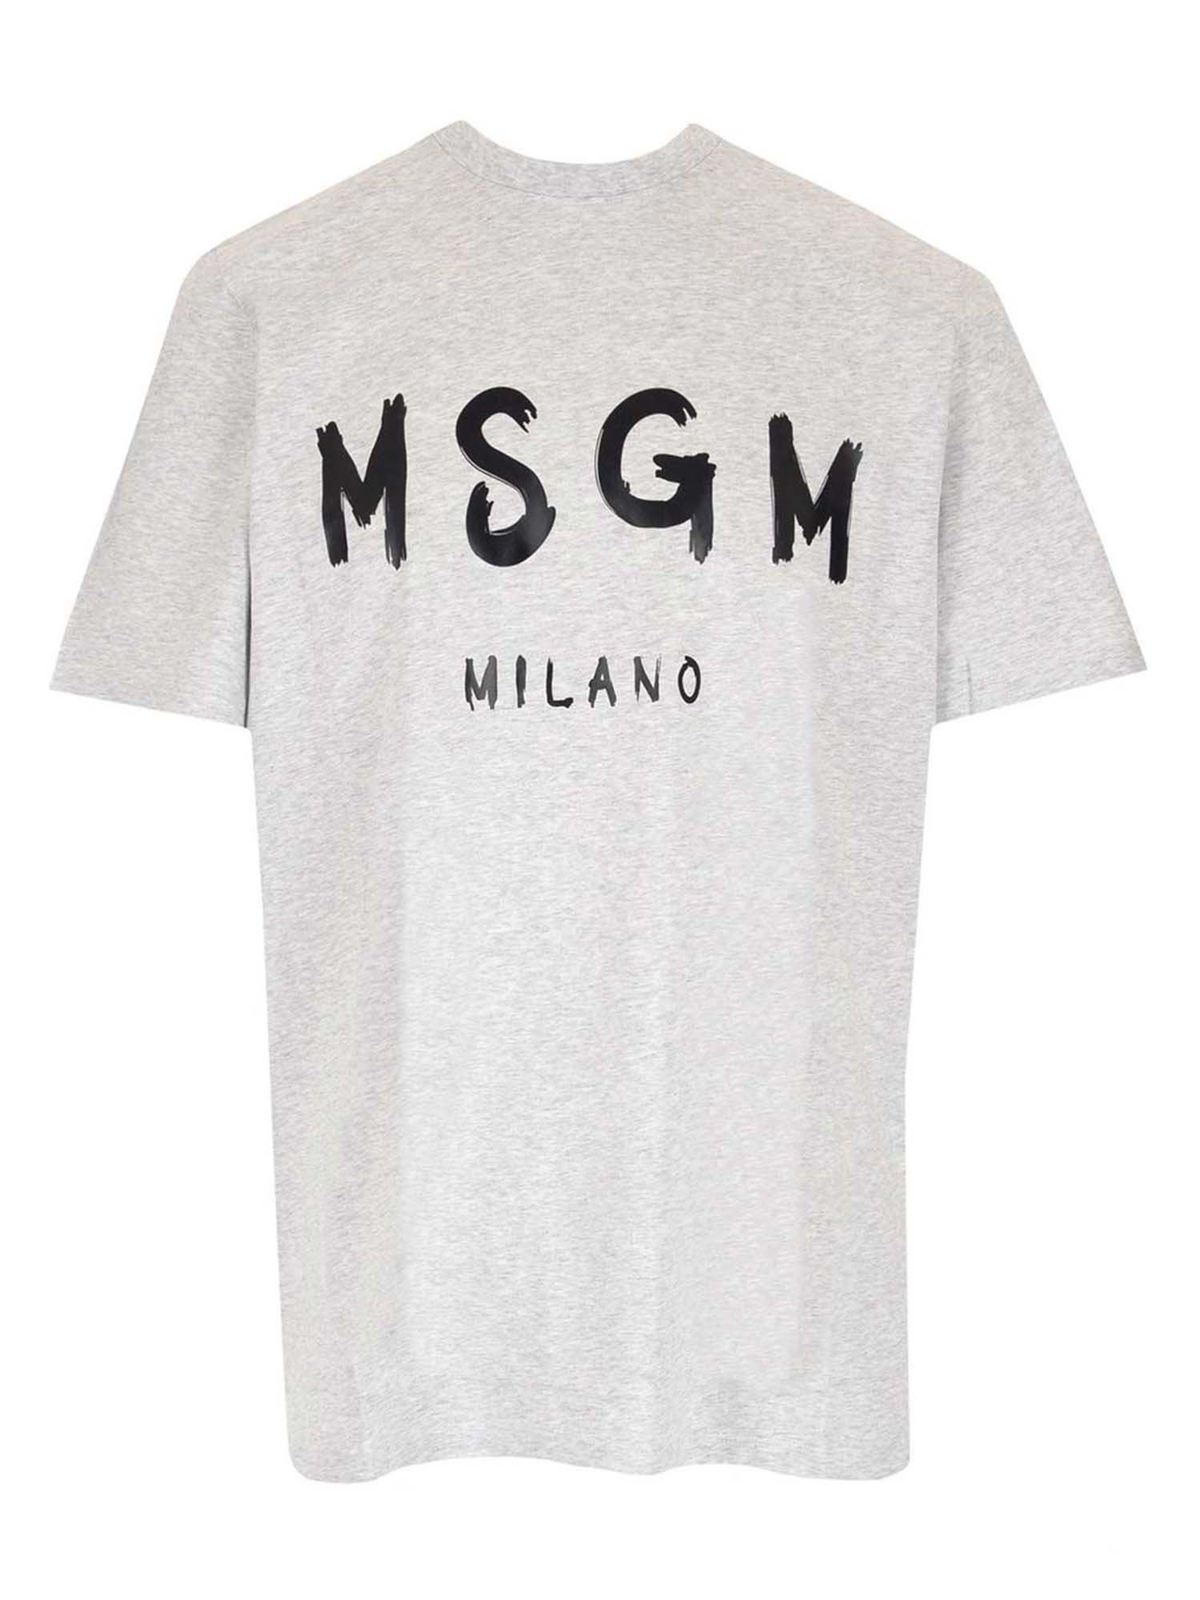 Msgm Logo T-shirt In Gray And Black In Grey